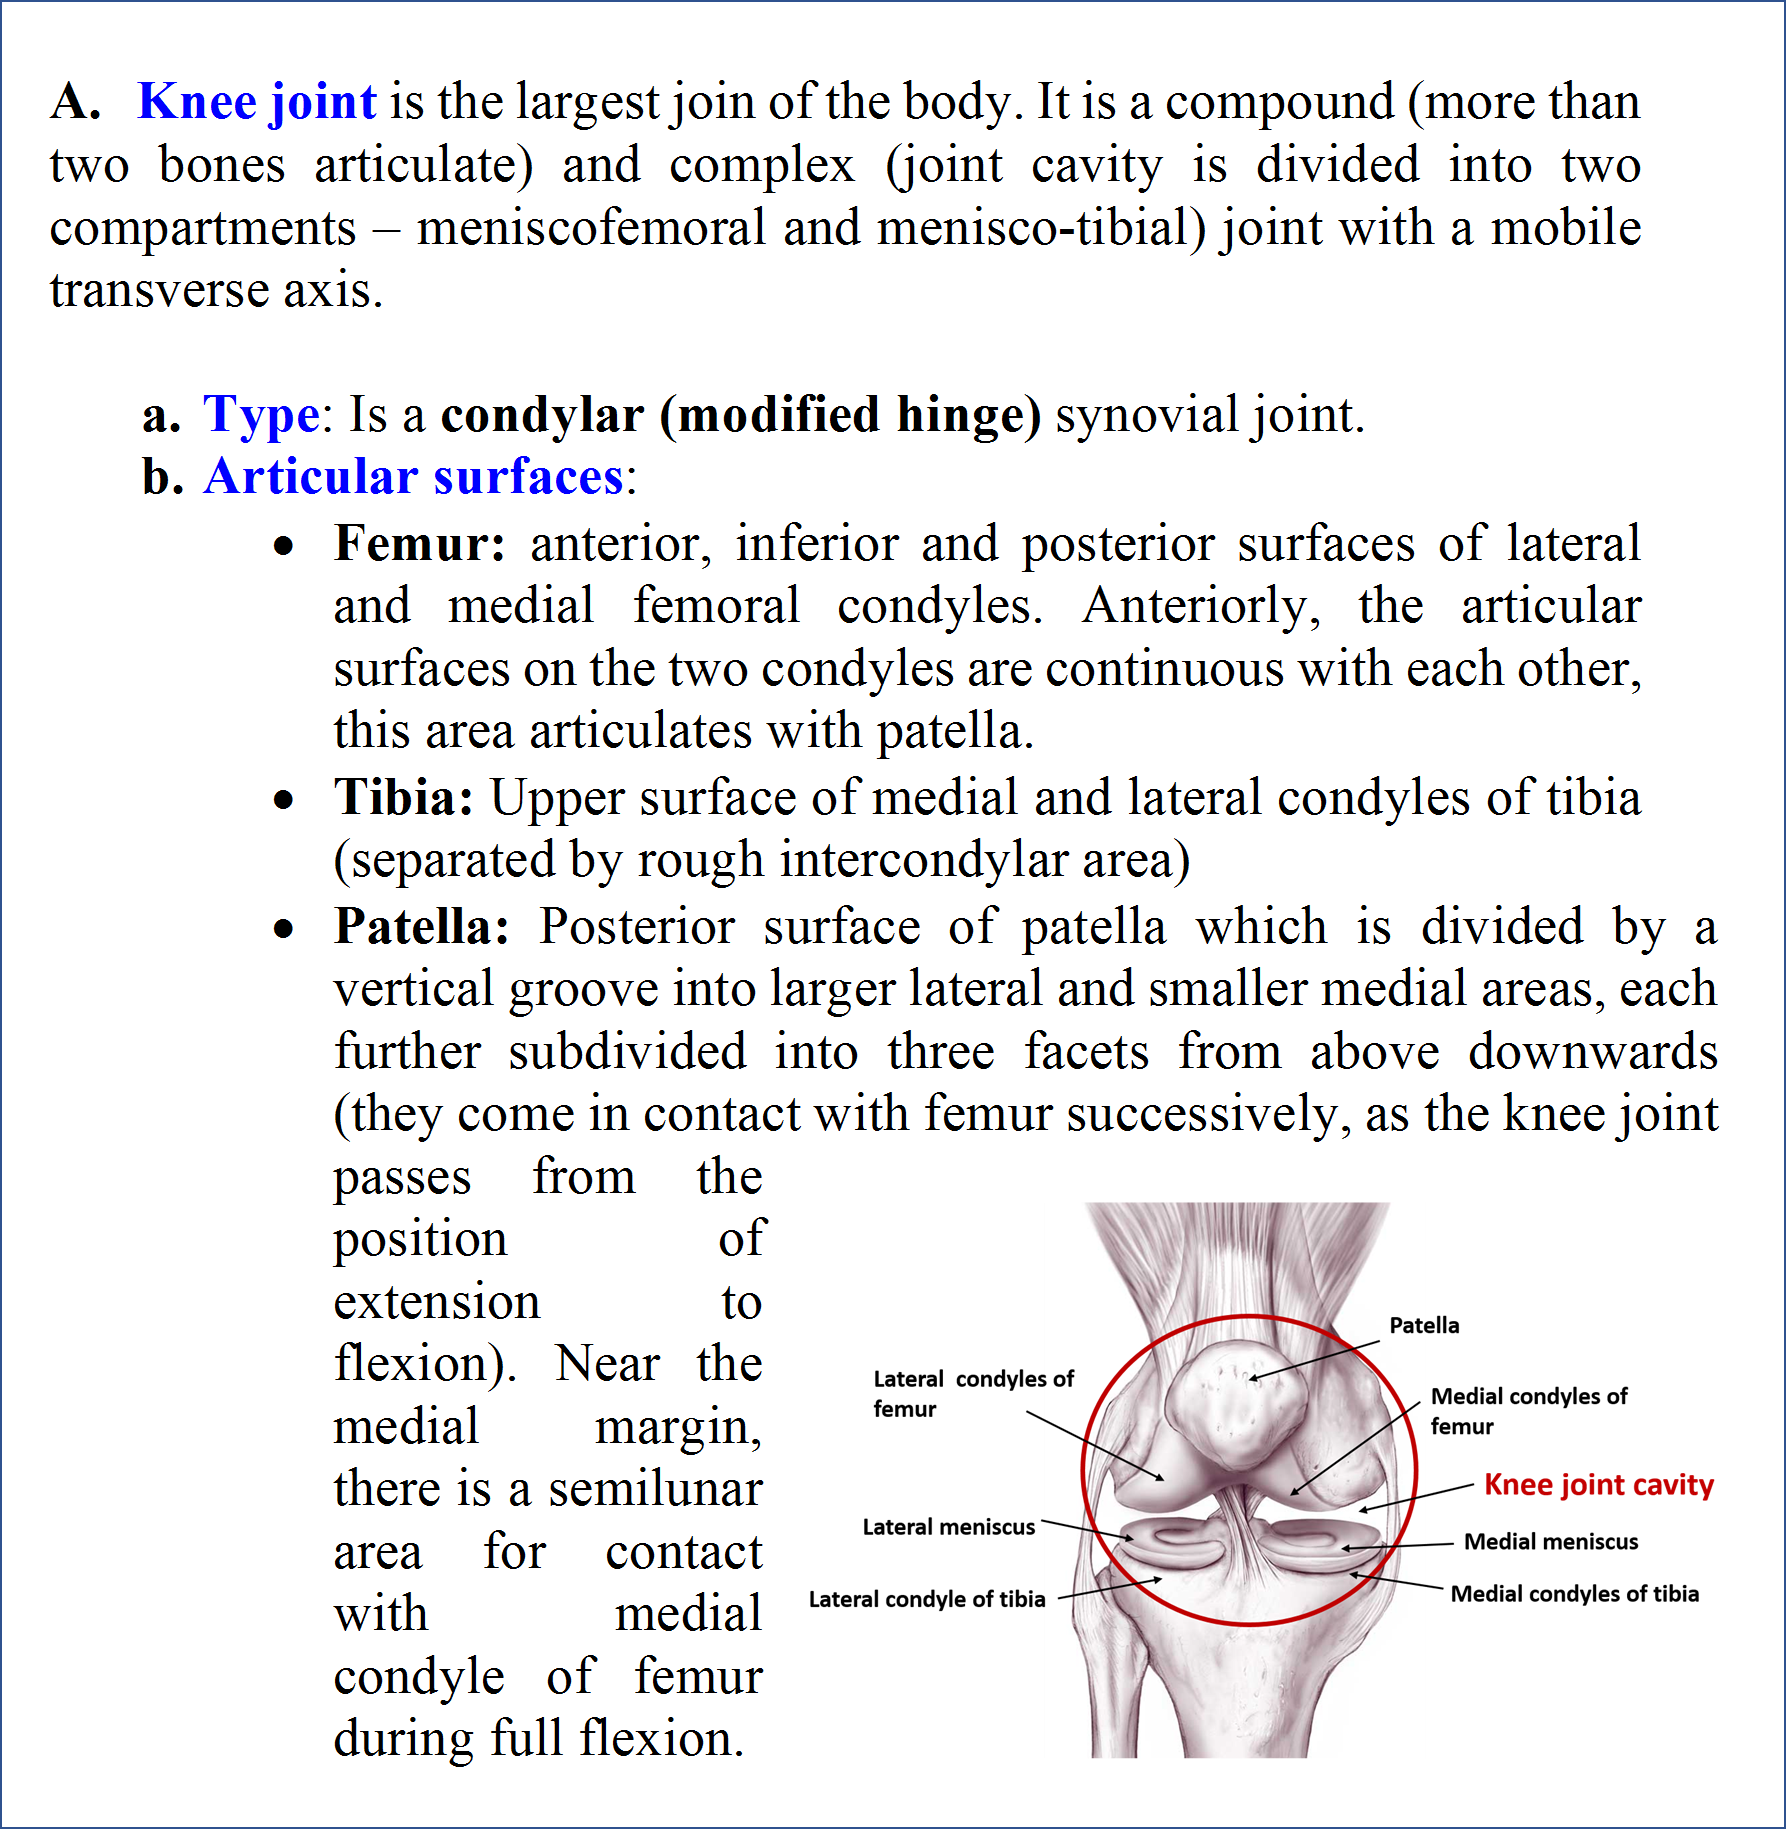 Knee Joint- Type and articular surfaces